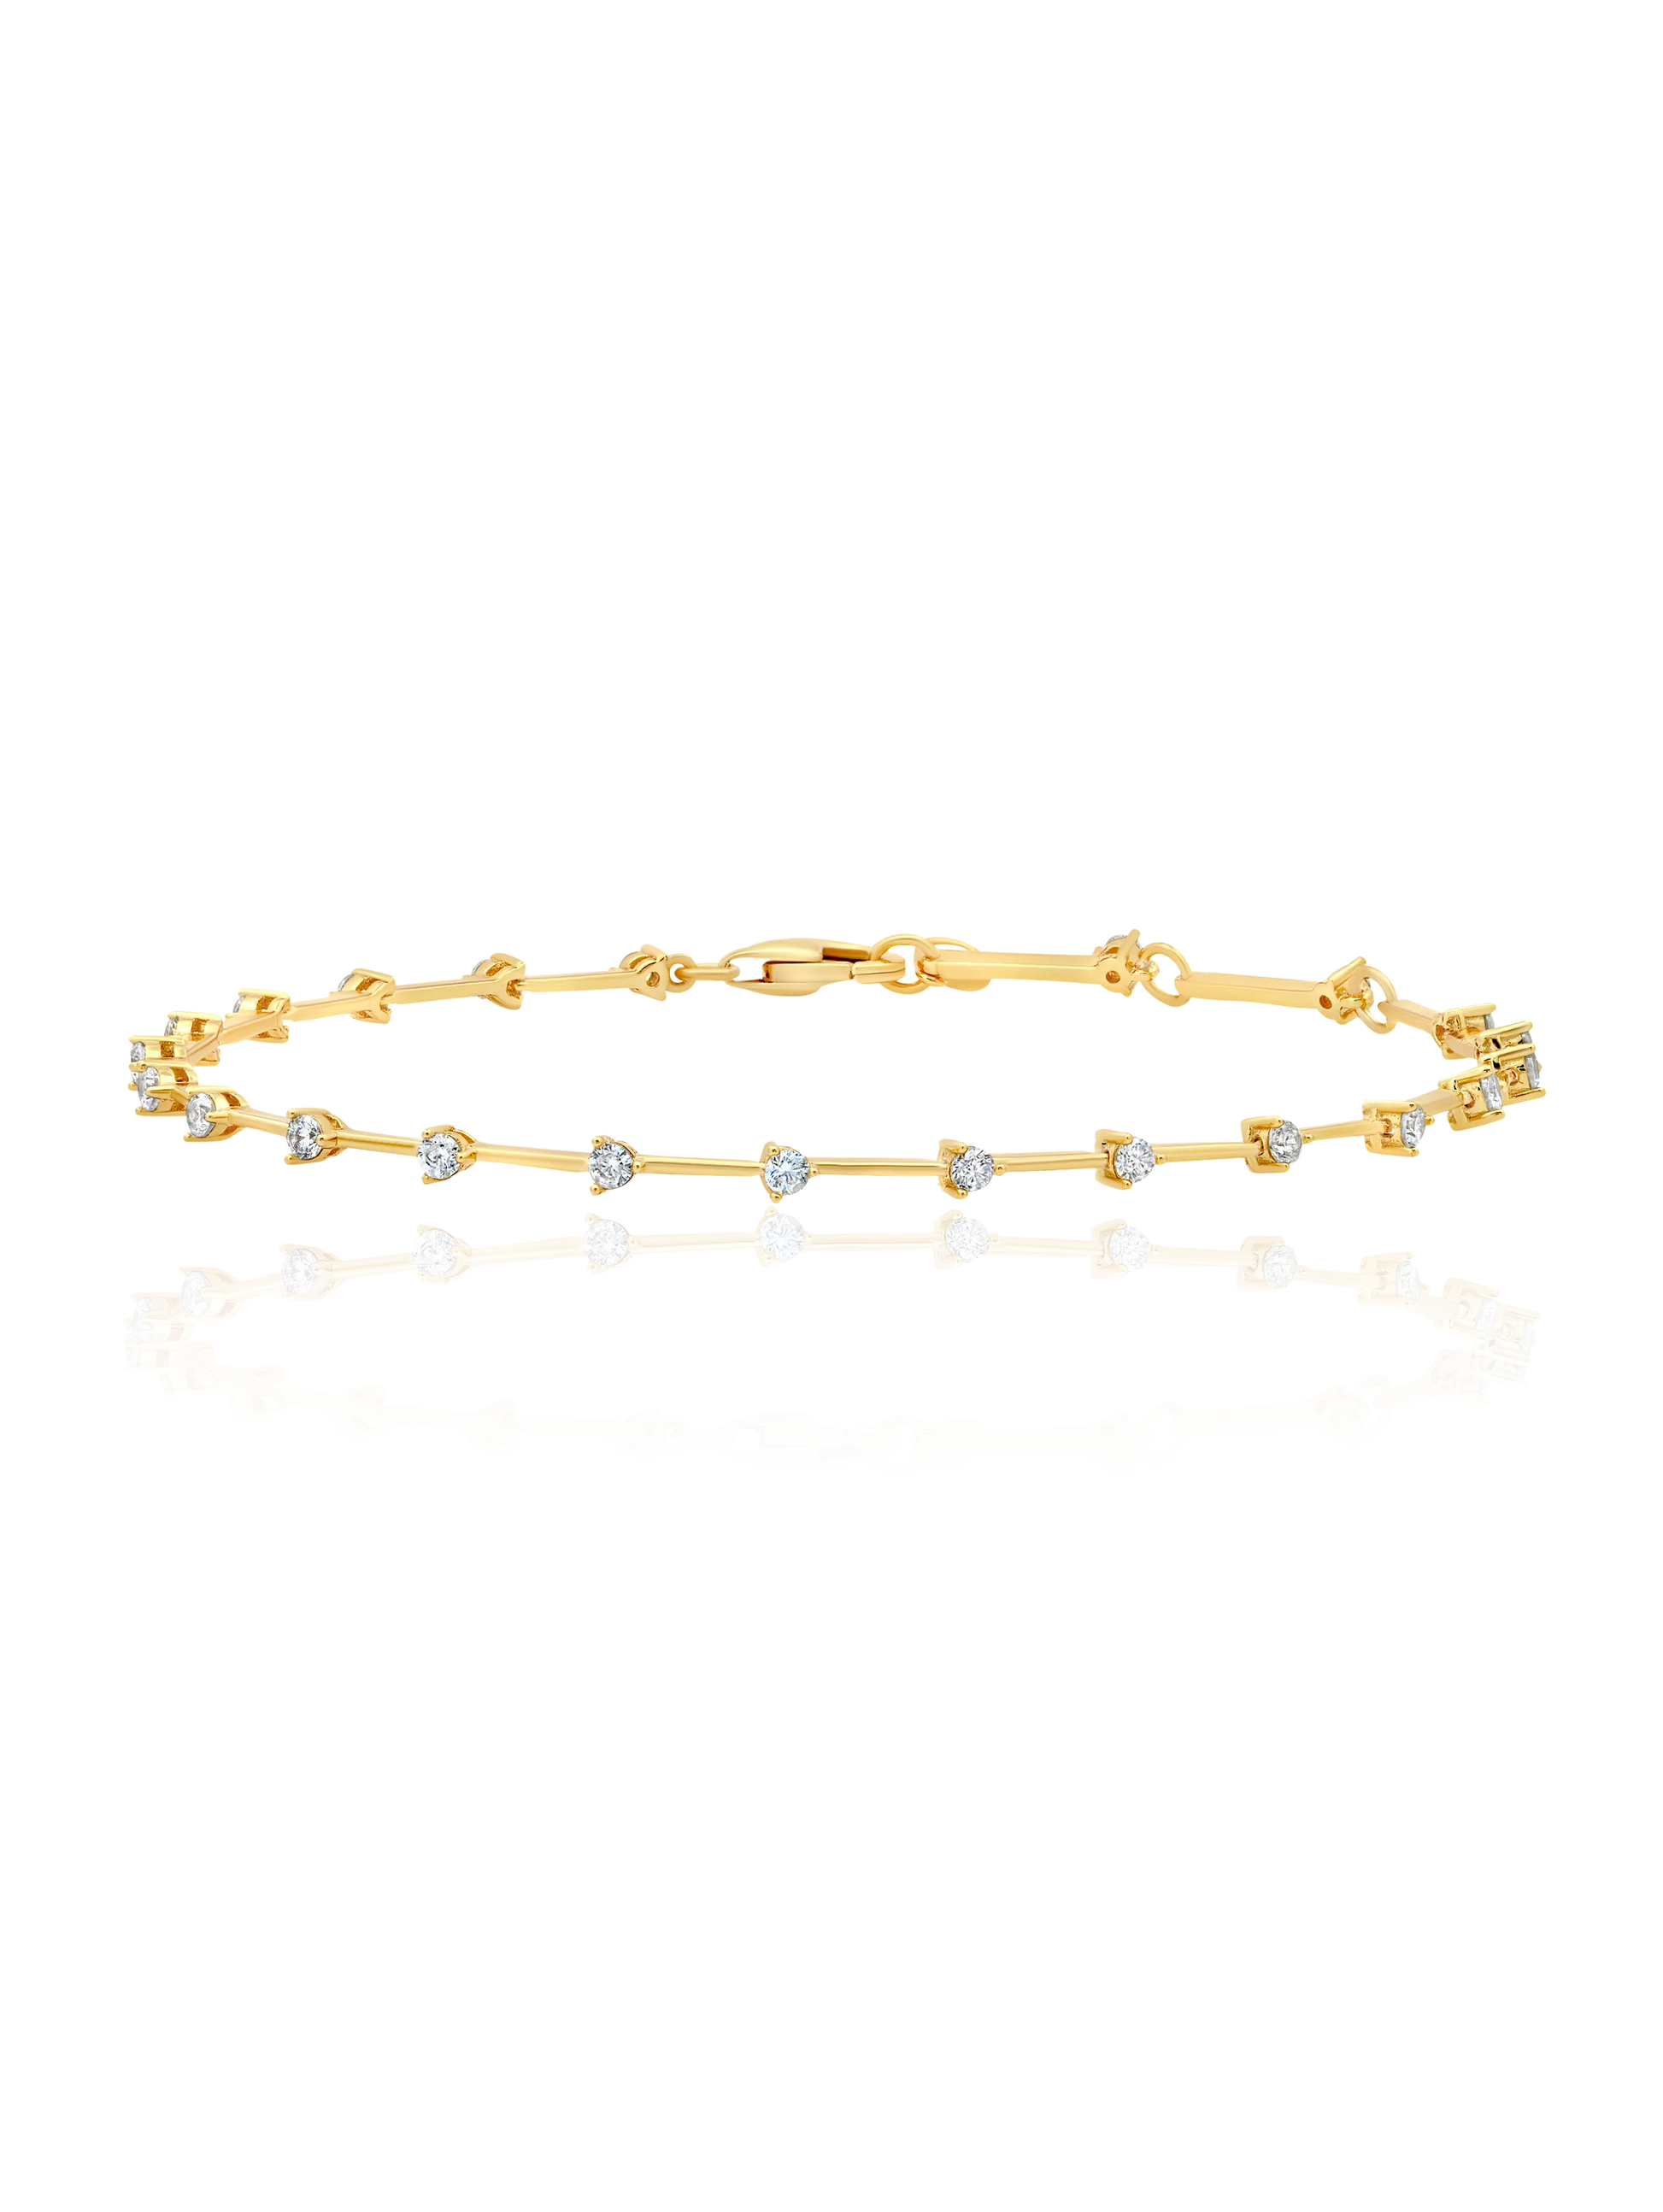 Bar Bracelet with Repeating 2mm Stones